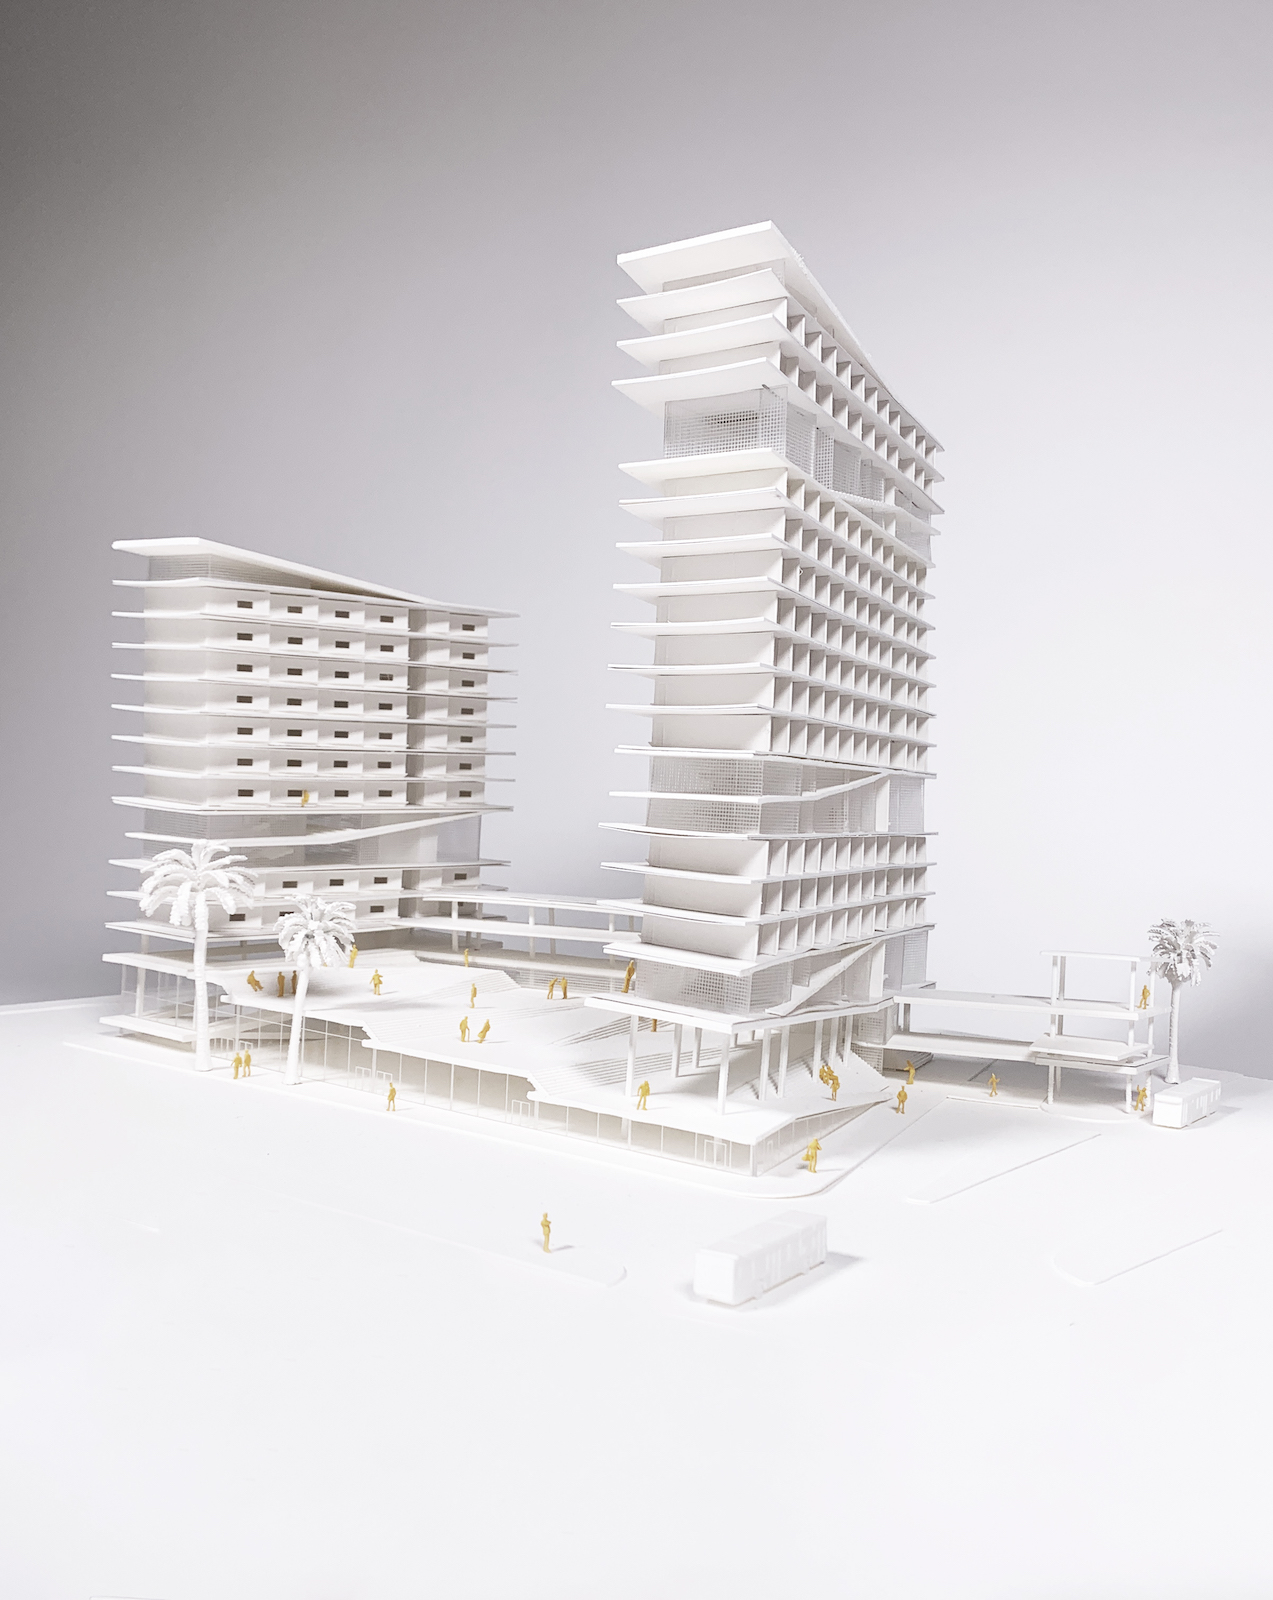 Final model of Aria Griffin's proposed project